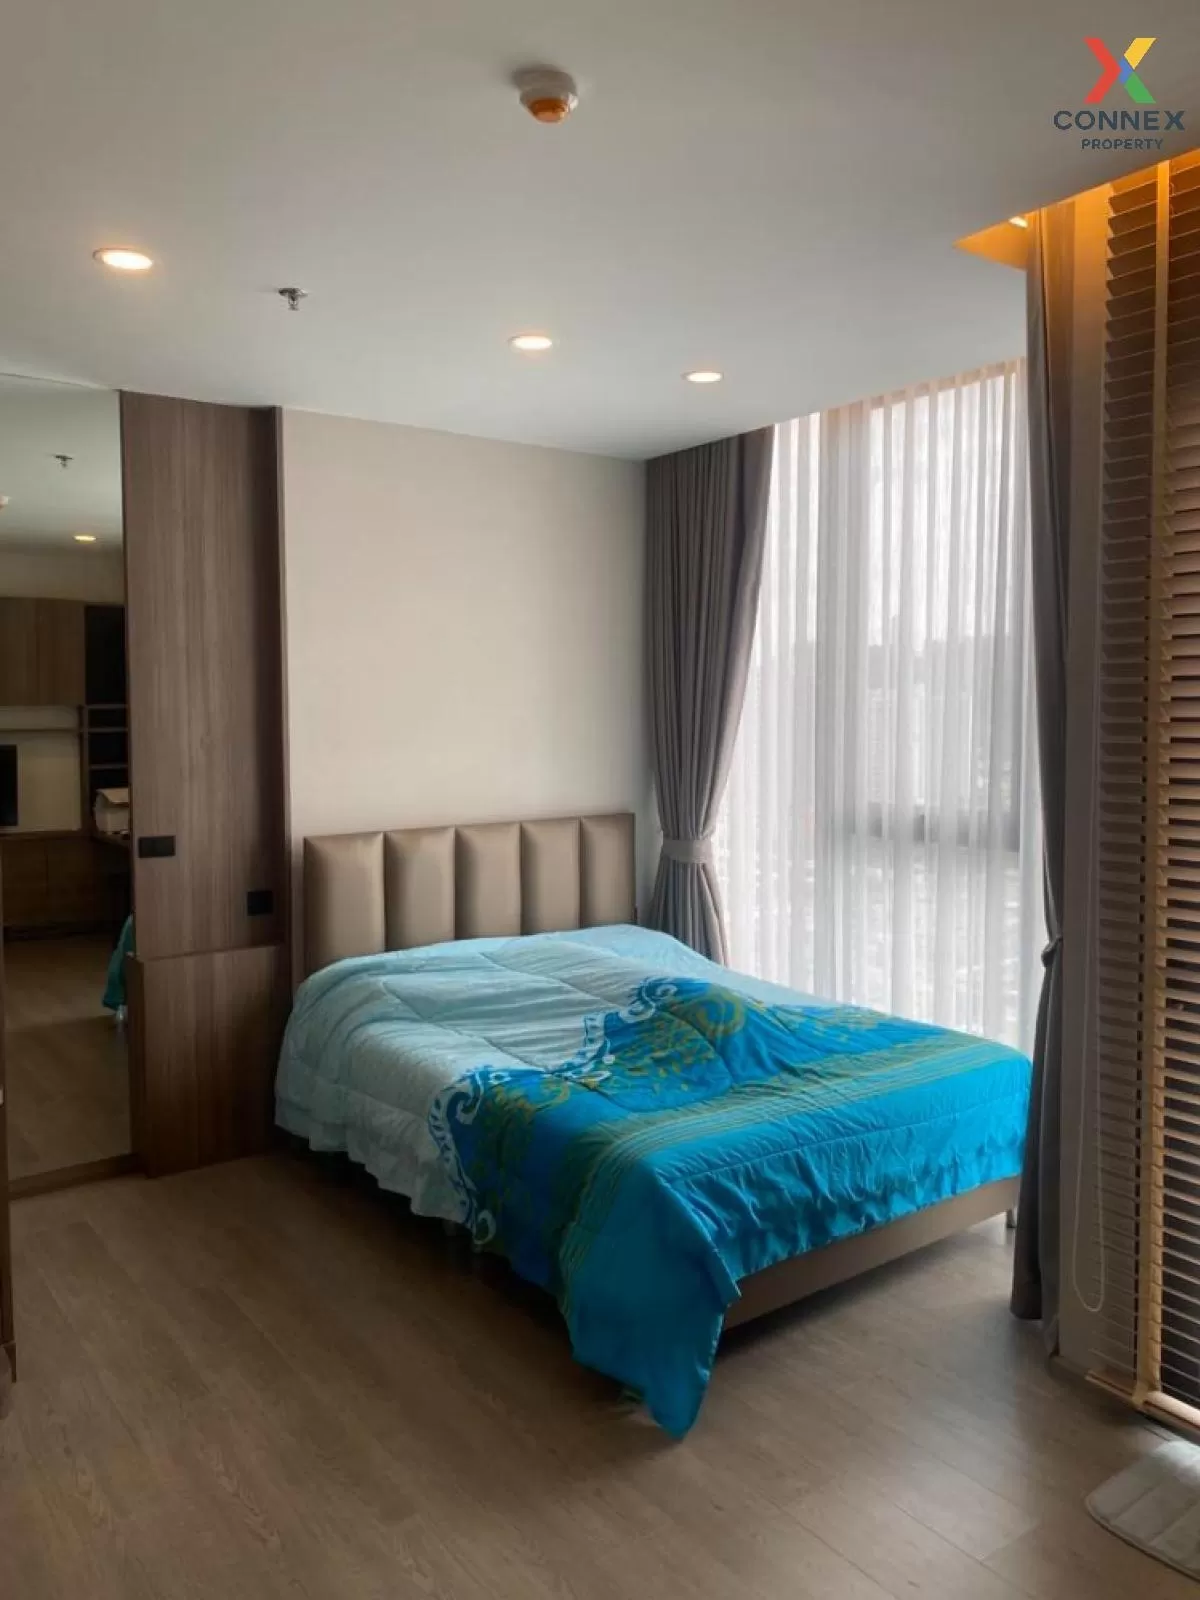 For Sale Condo , Cooper Siam , BTS-National Stadium , Rong Mueang , Pathum Wan , Bangkok , CX-86539